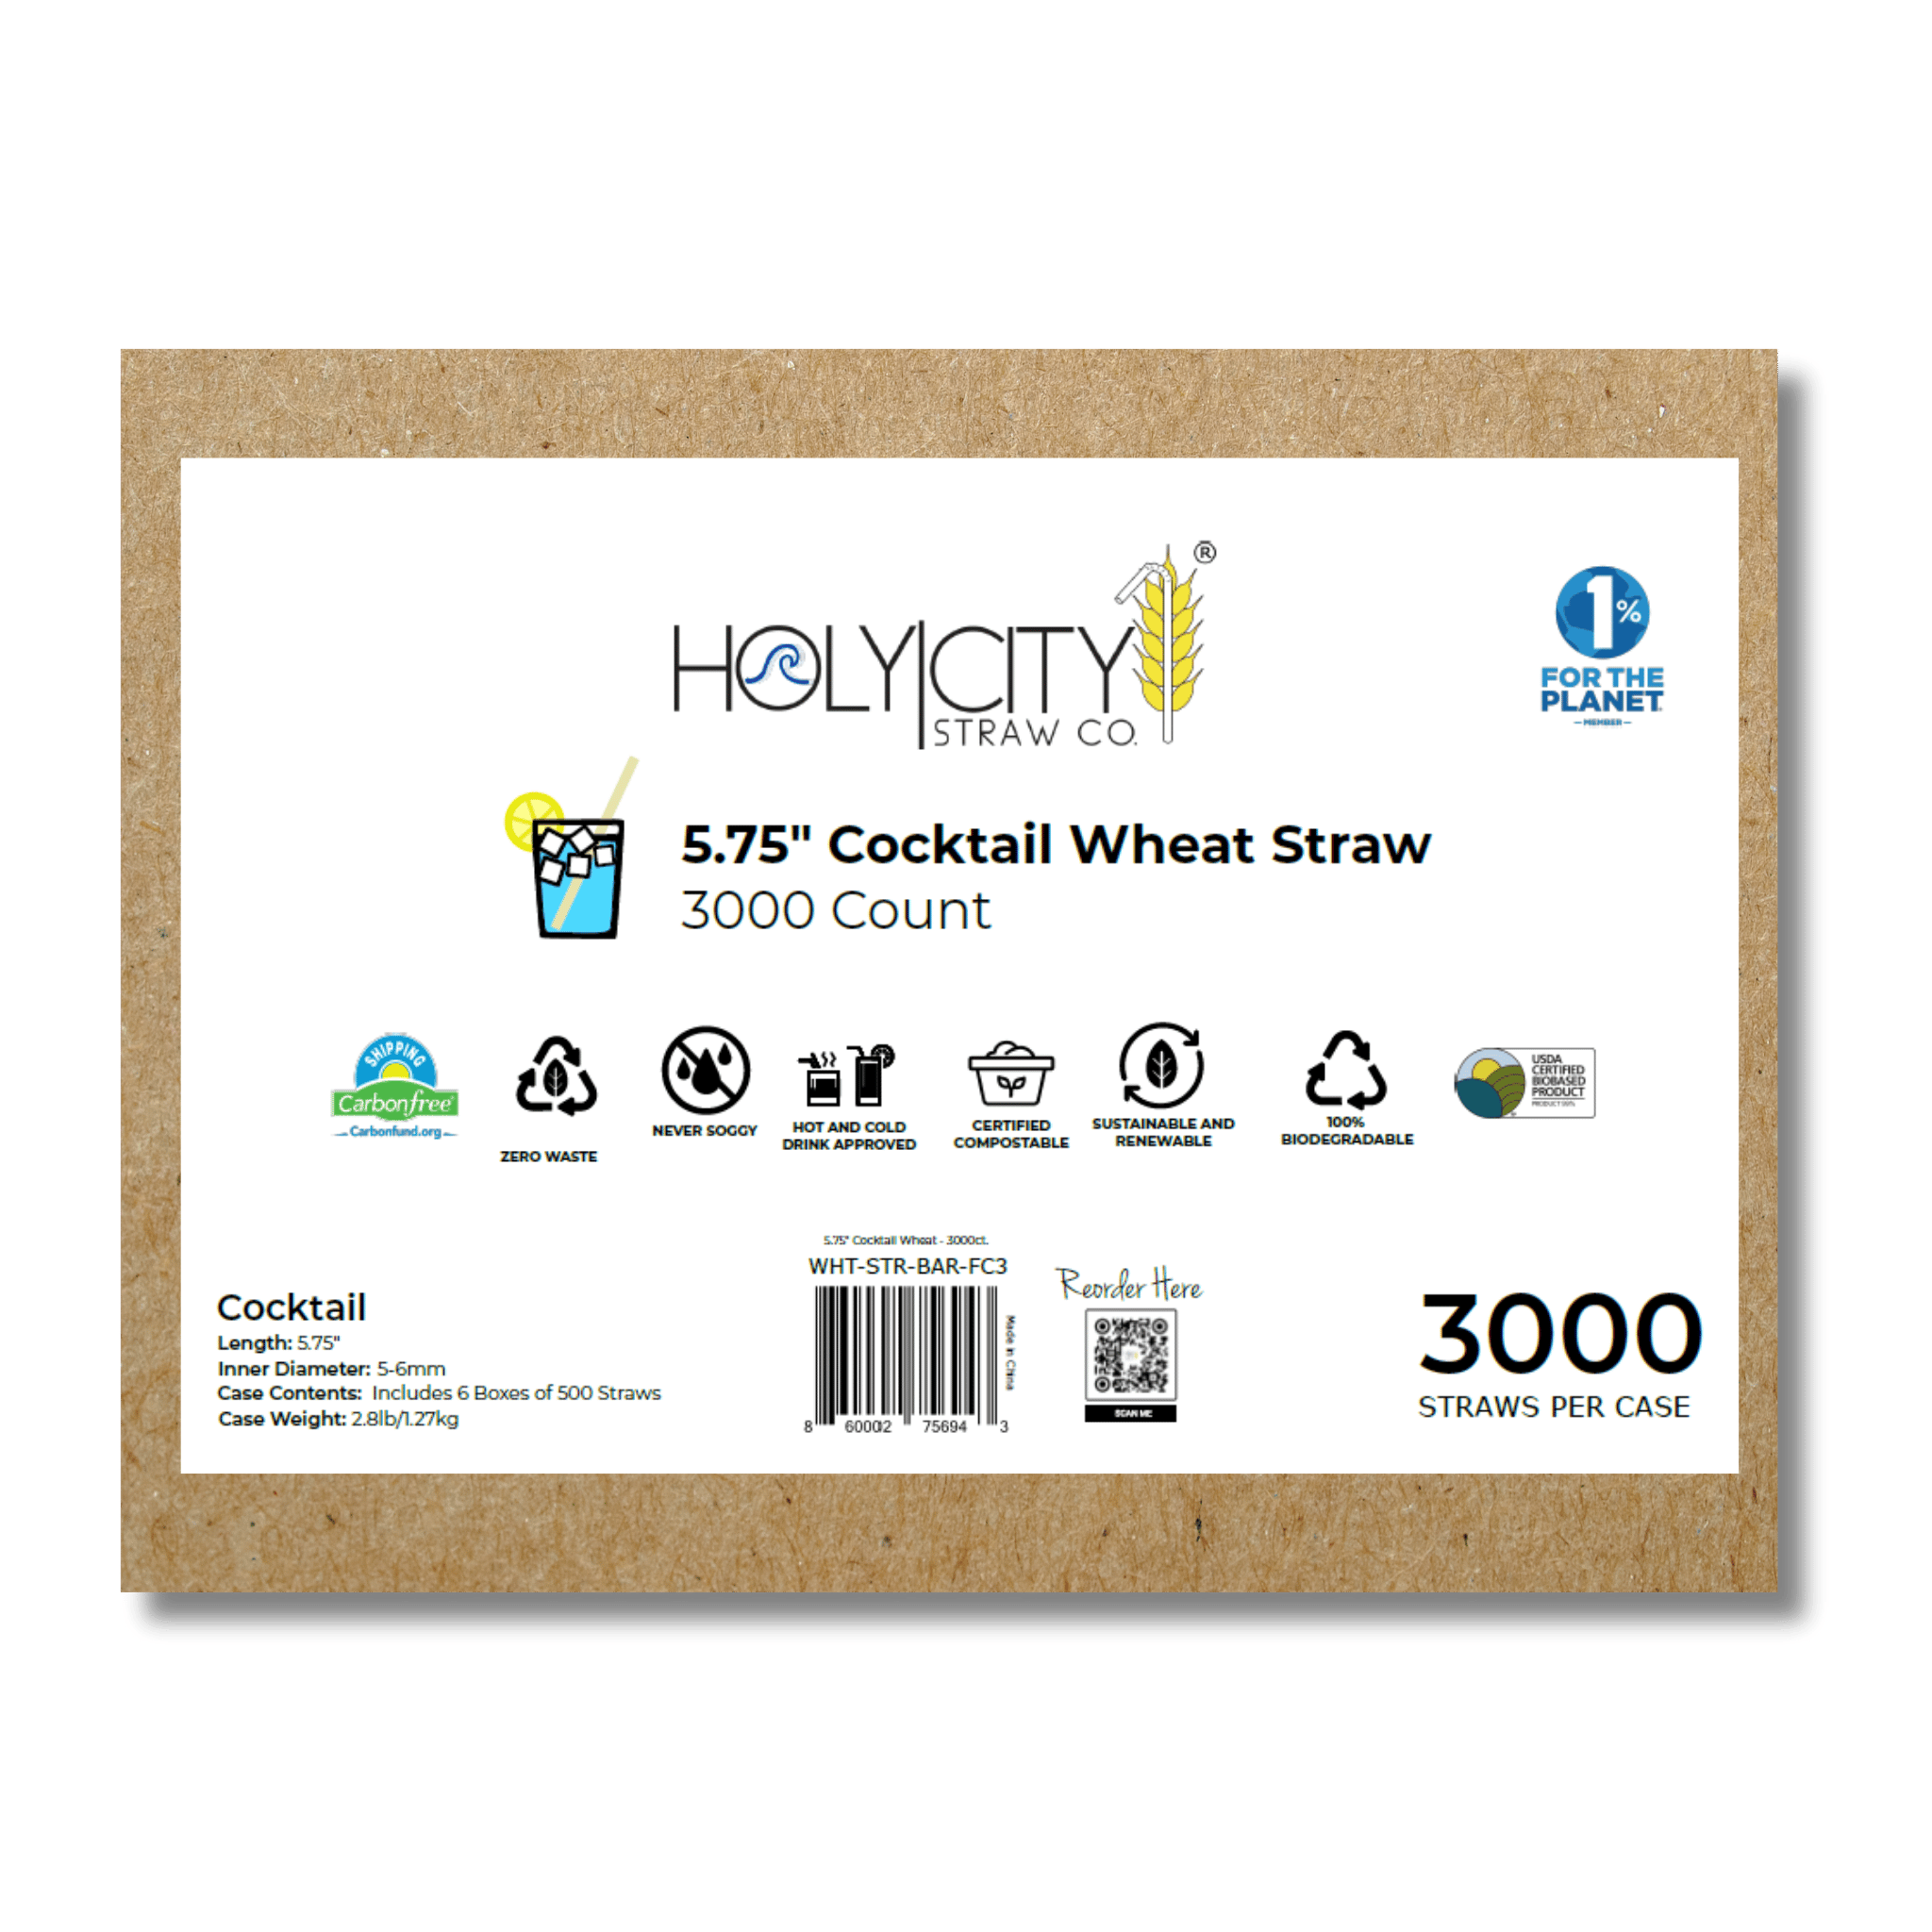 HolyCityStrawCompany 5.75-inch Wheat Cocktail Straws box of 3000 straws with sustainable, zero waste, and biodegradable icons.